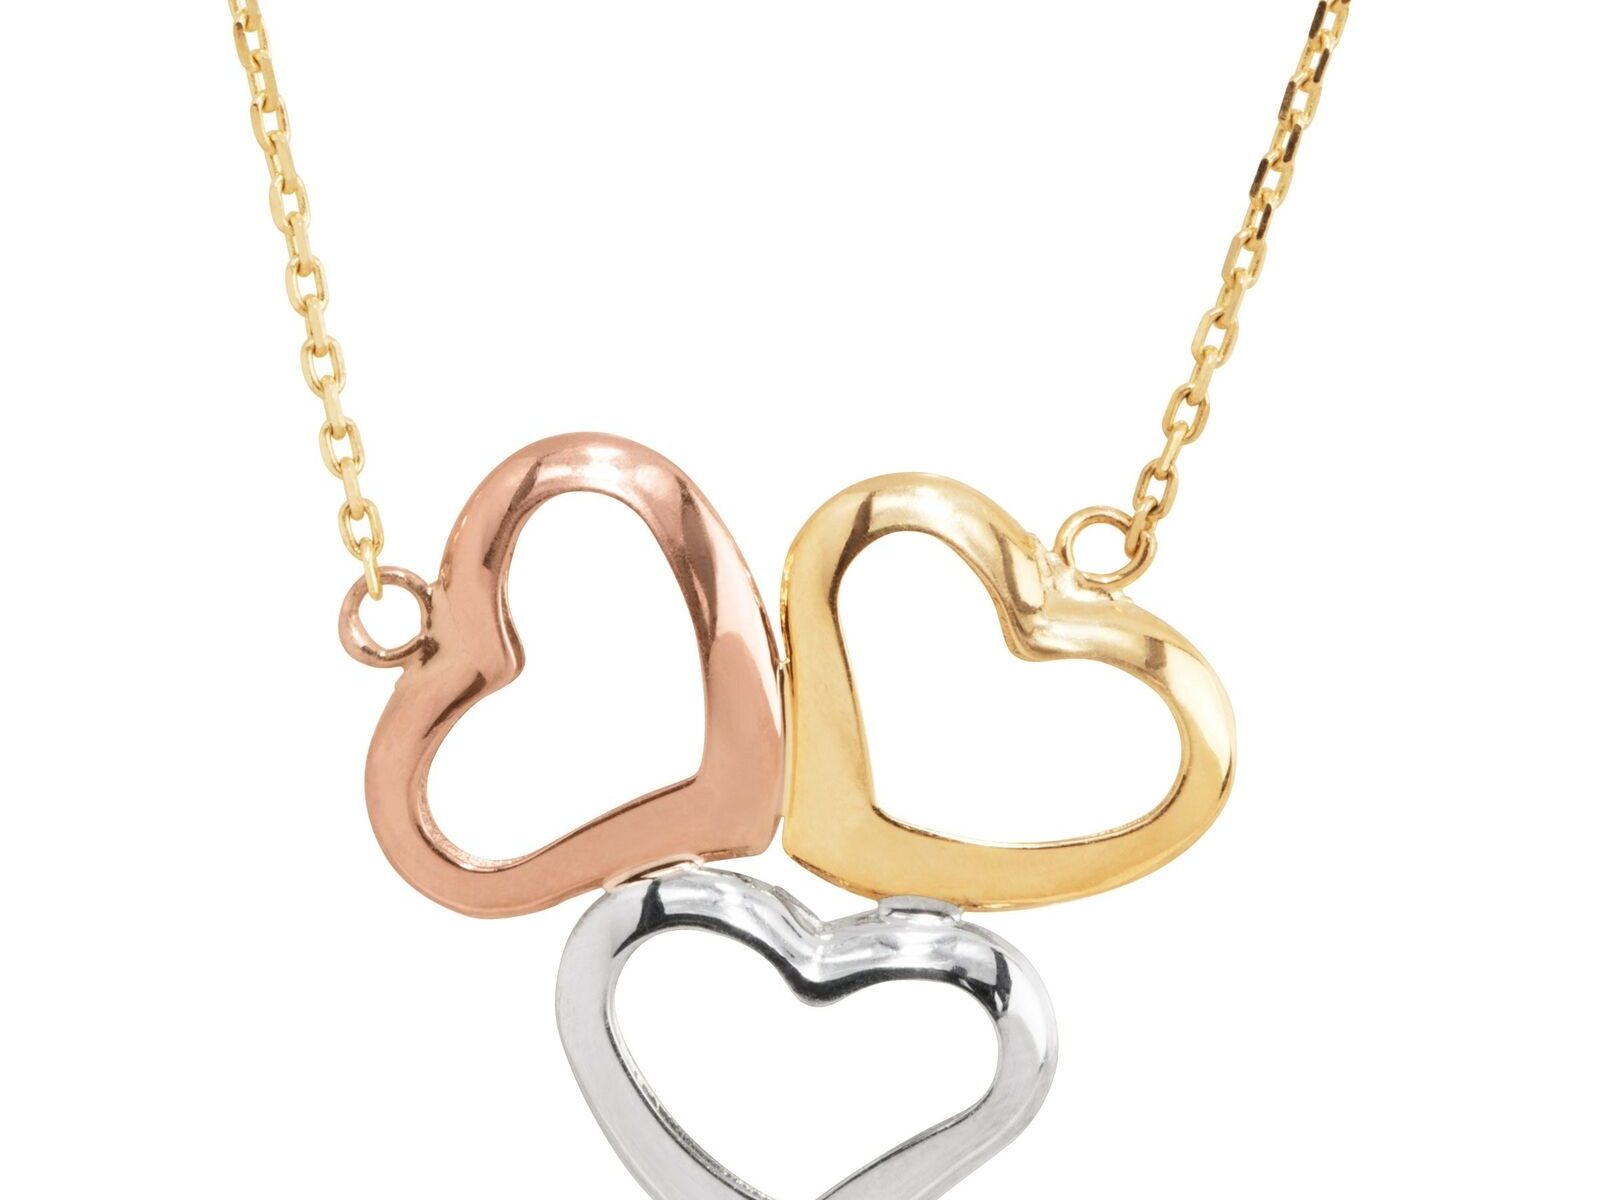 Eternity Gold Open Heart Cluster Necklace in 10K Three-Tone Gold, 18"